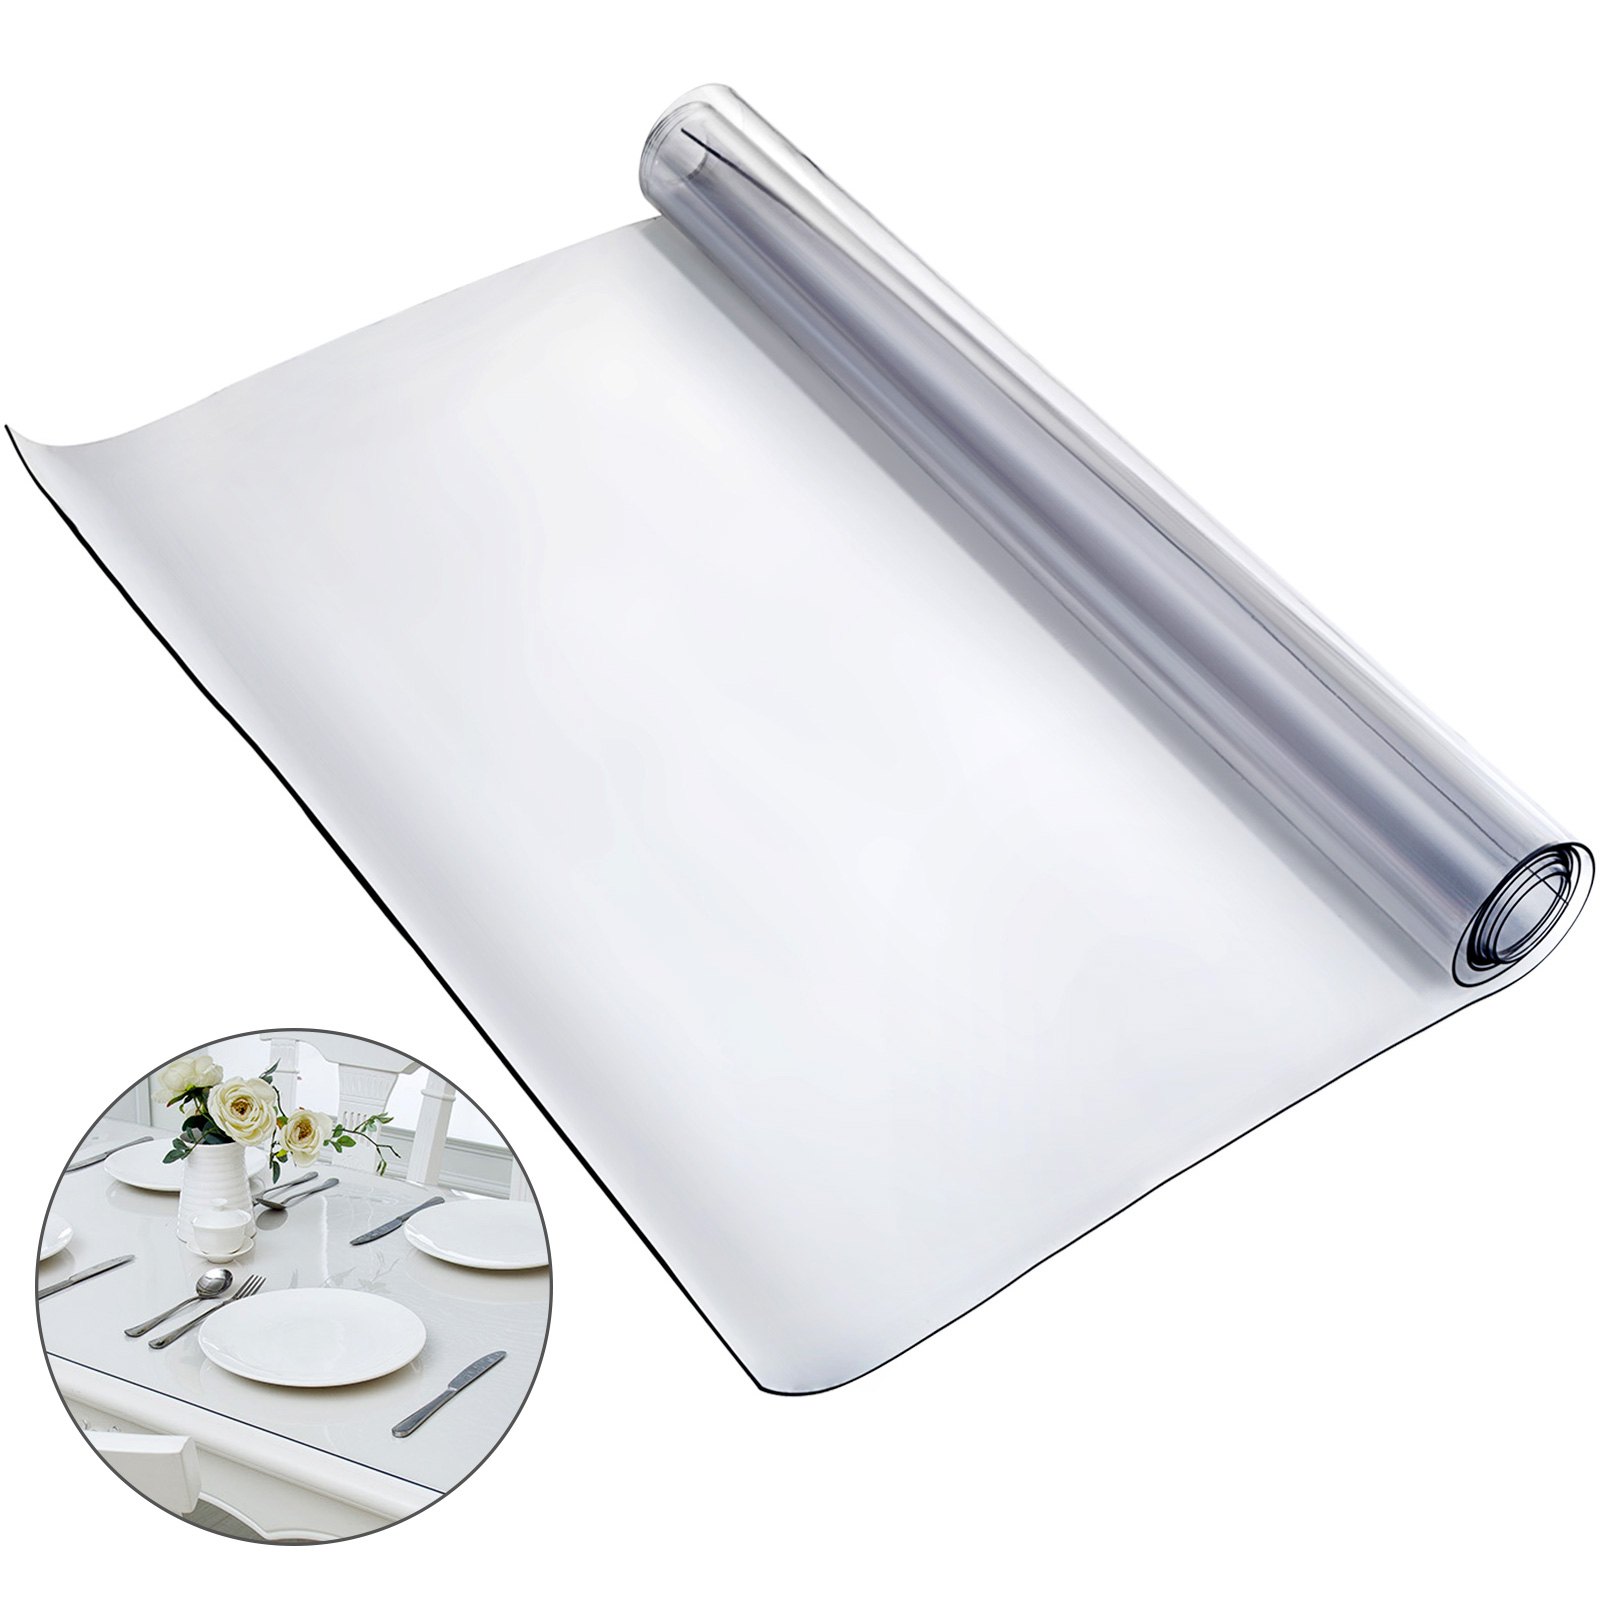 Crystal Clear Pvc Tablecloth Protector Table Cover 42" X 80" High Quality от Vevor Many GEOs